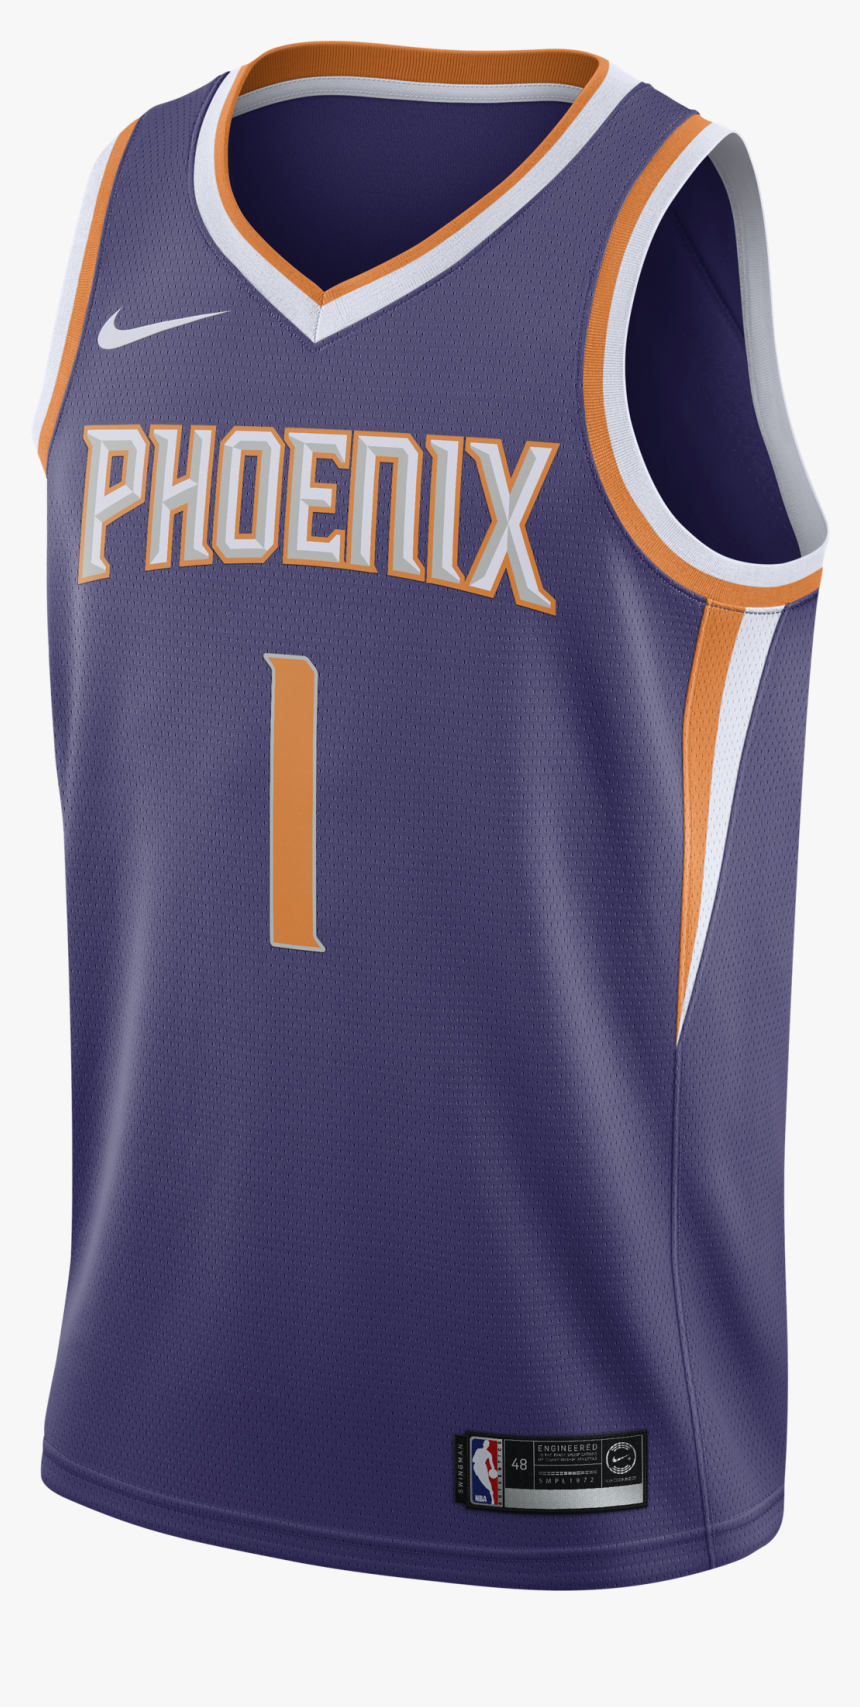 Phoenix Suns Jersey 2019, HD Png Download, Free Download